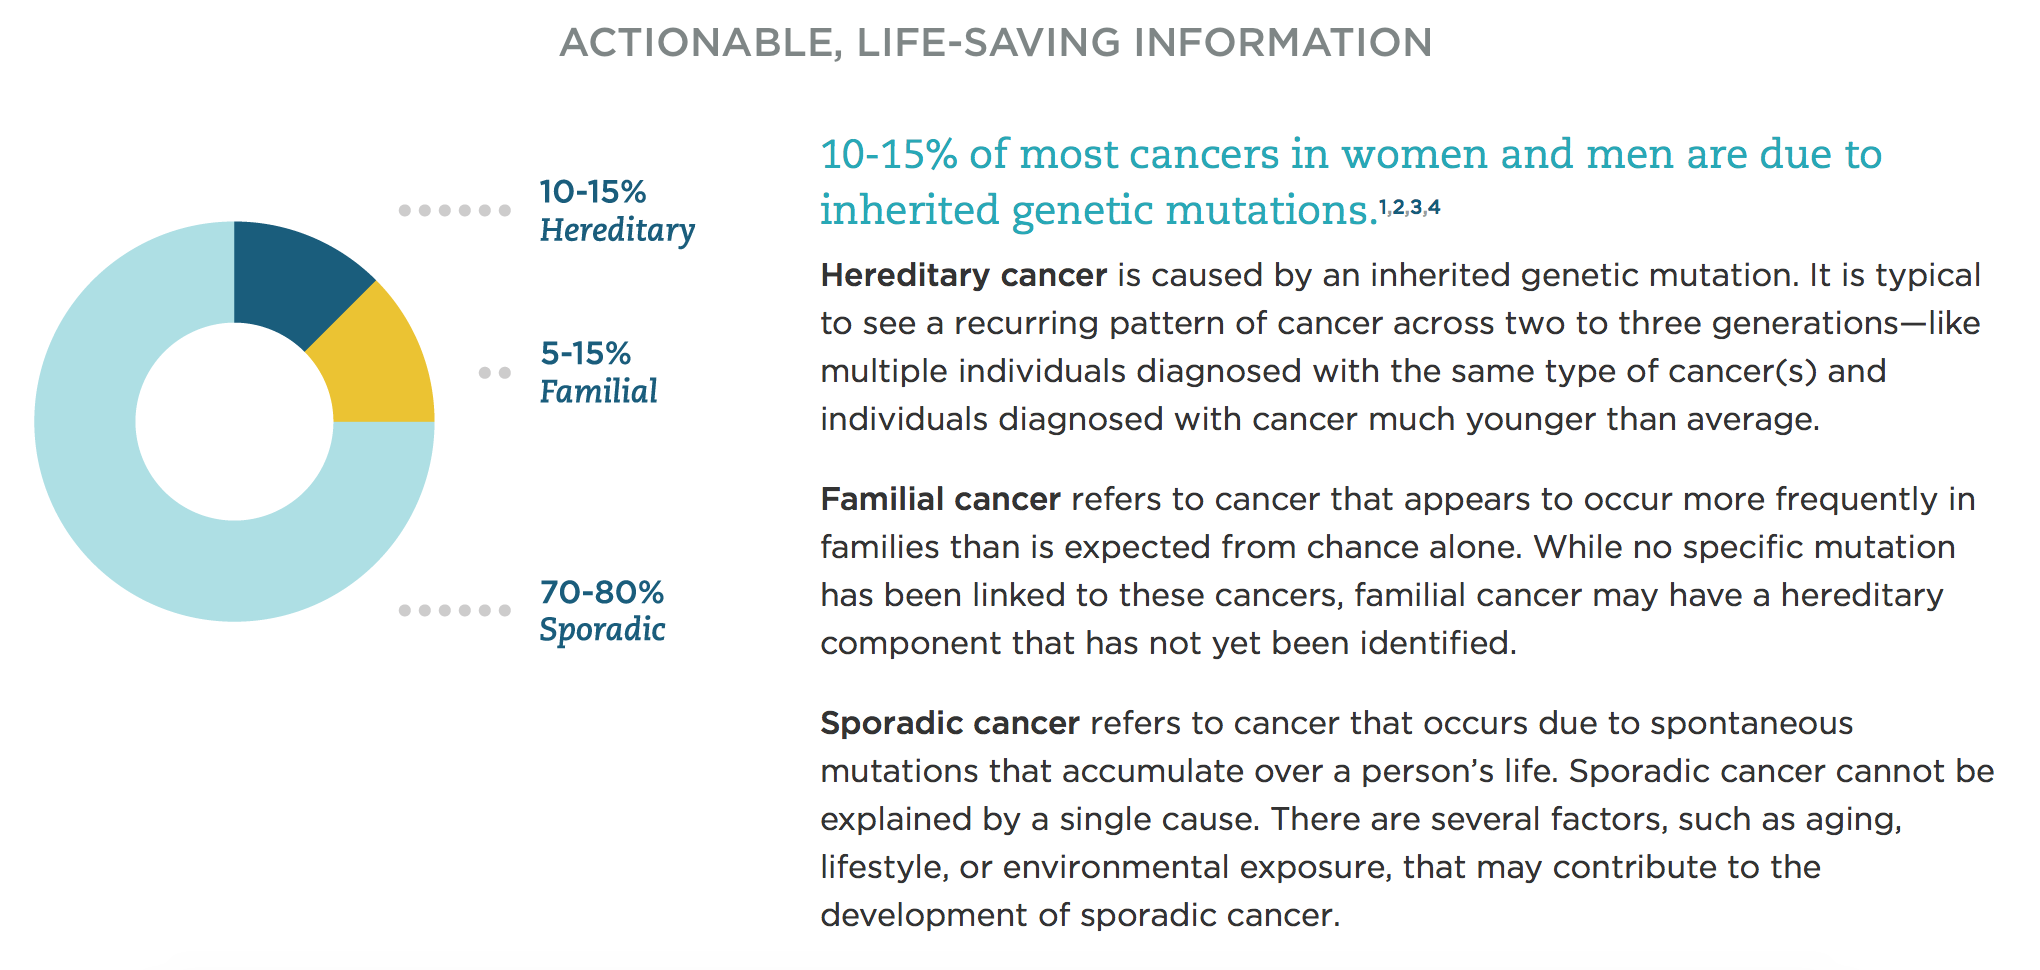 familial cancer causes)